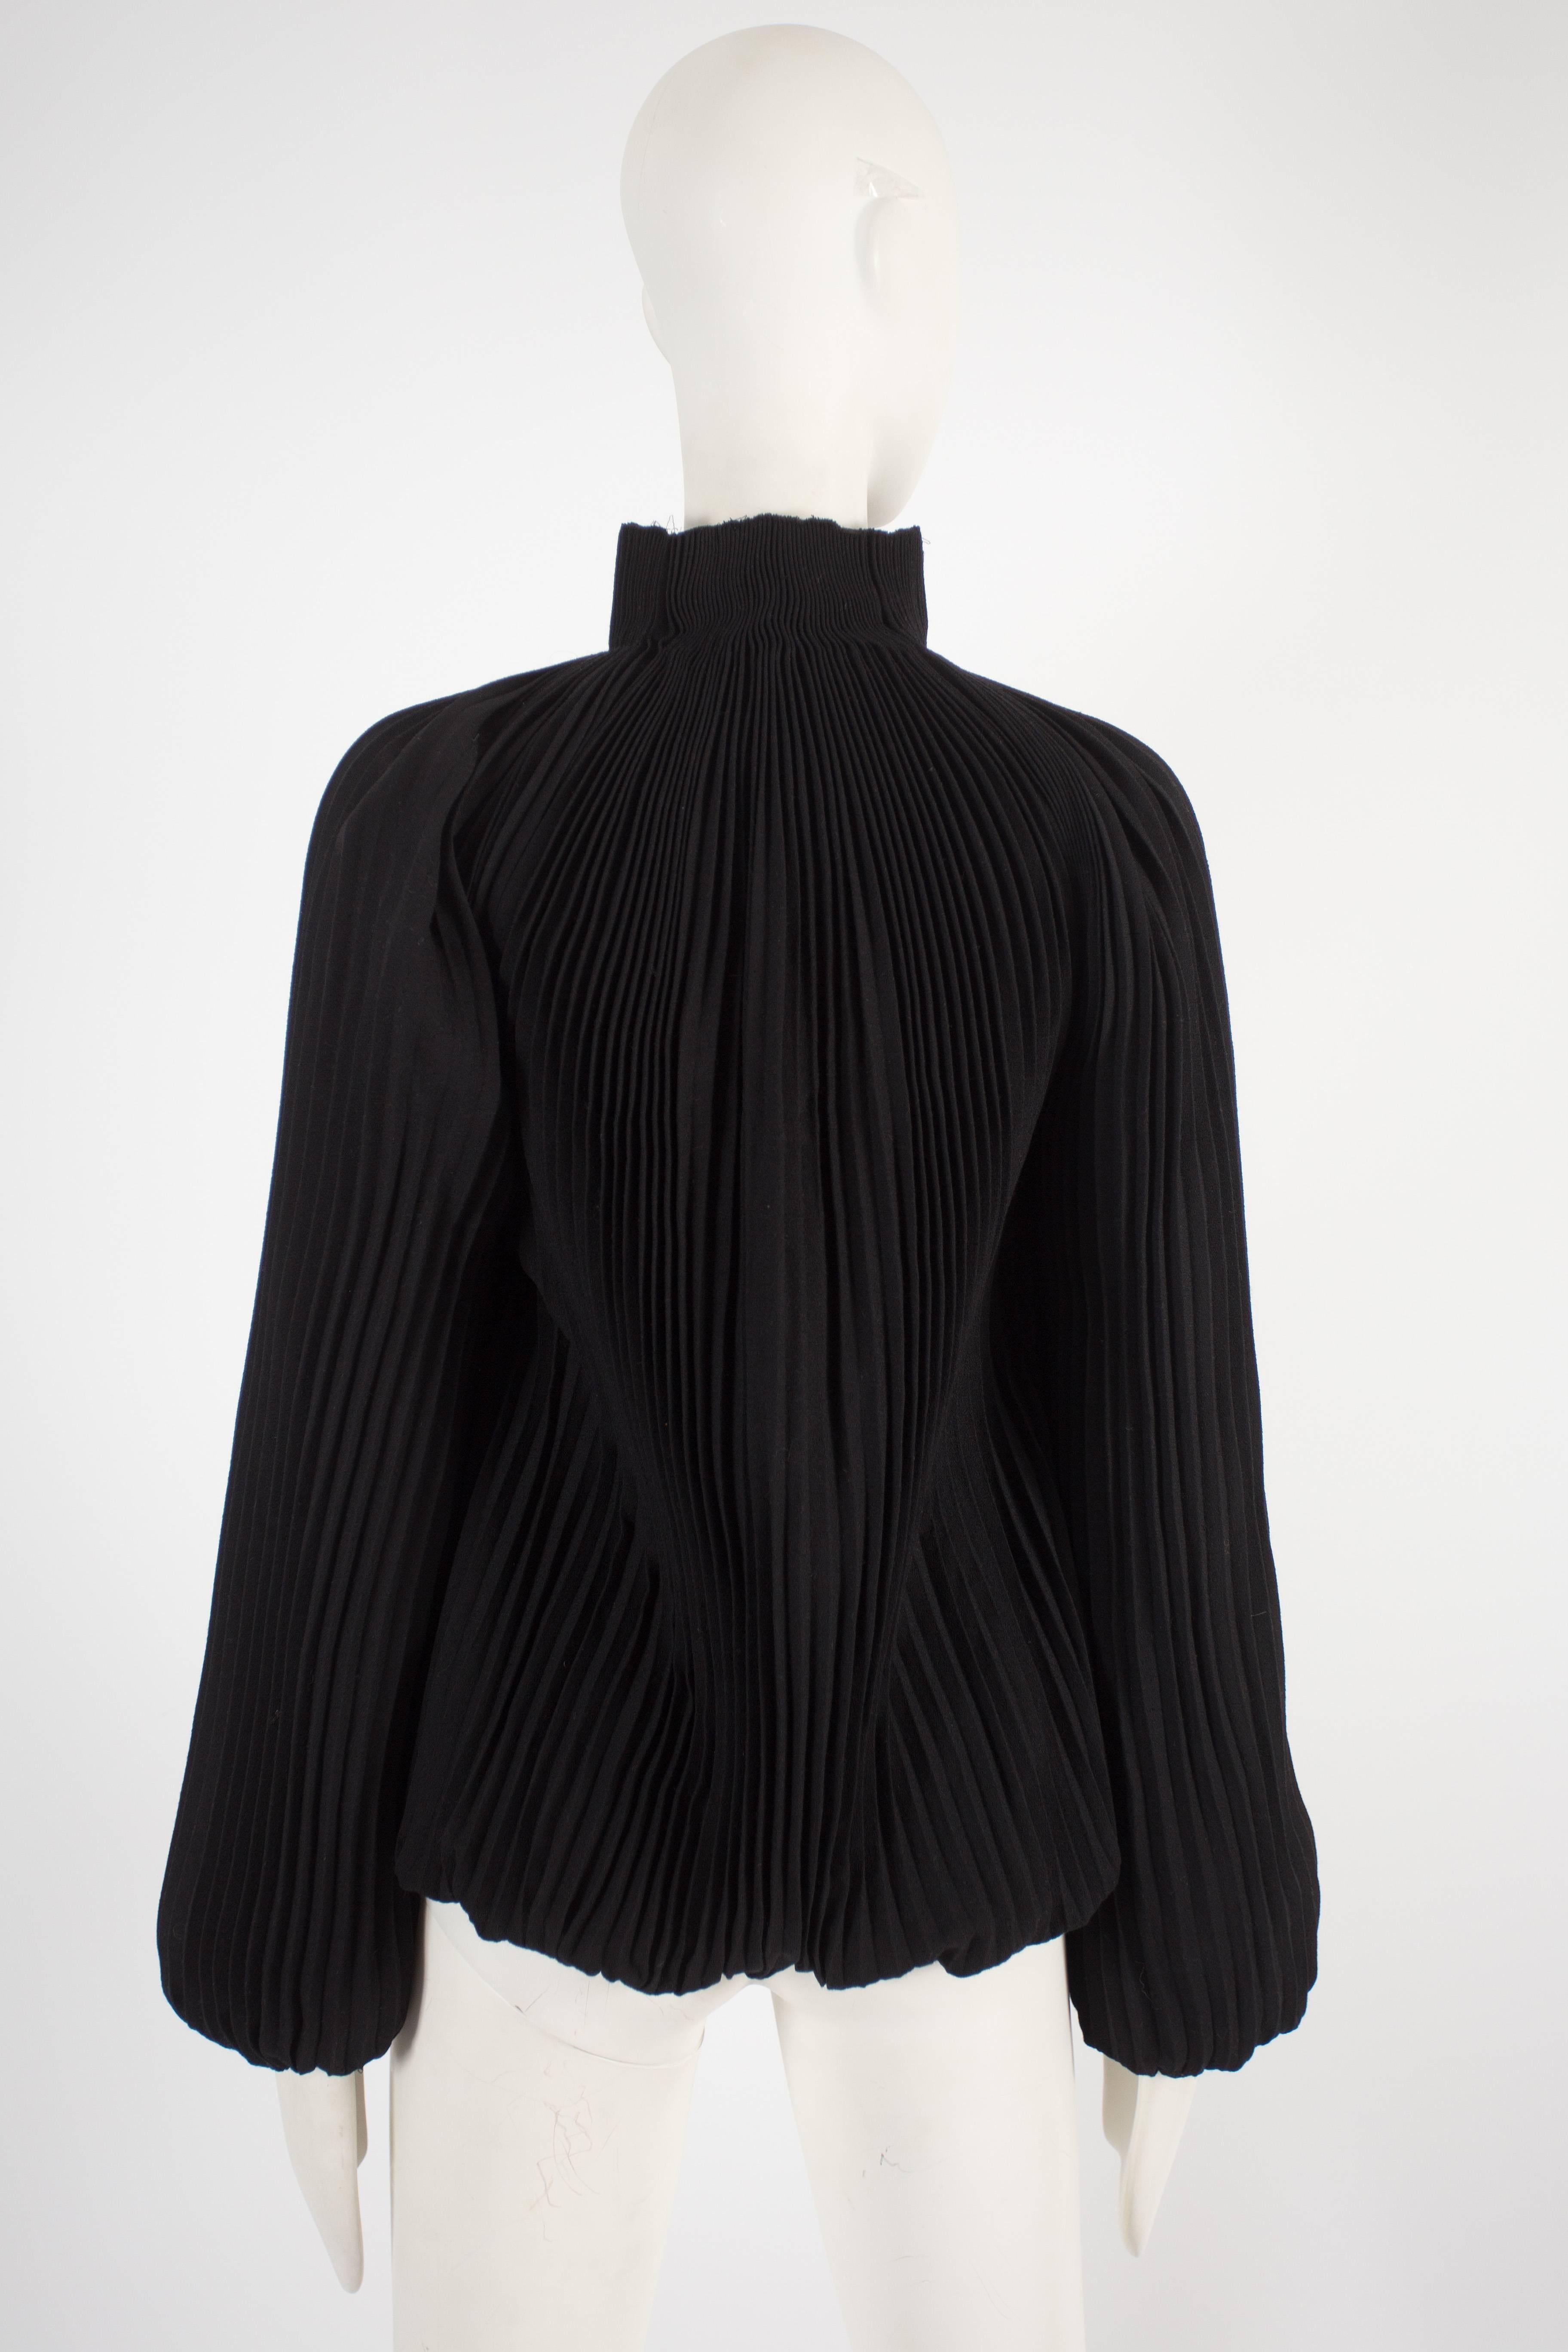 Alexander McQueen accordion pleated evening jacket, circa 2004 For Sale ...